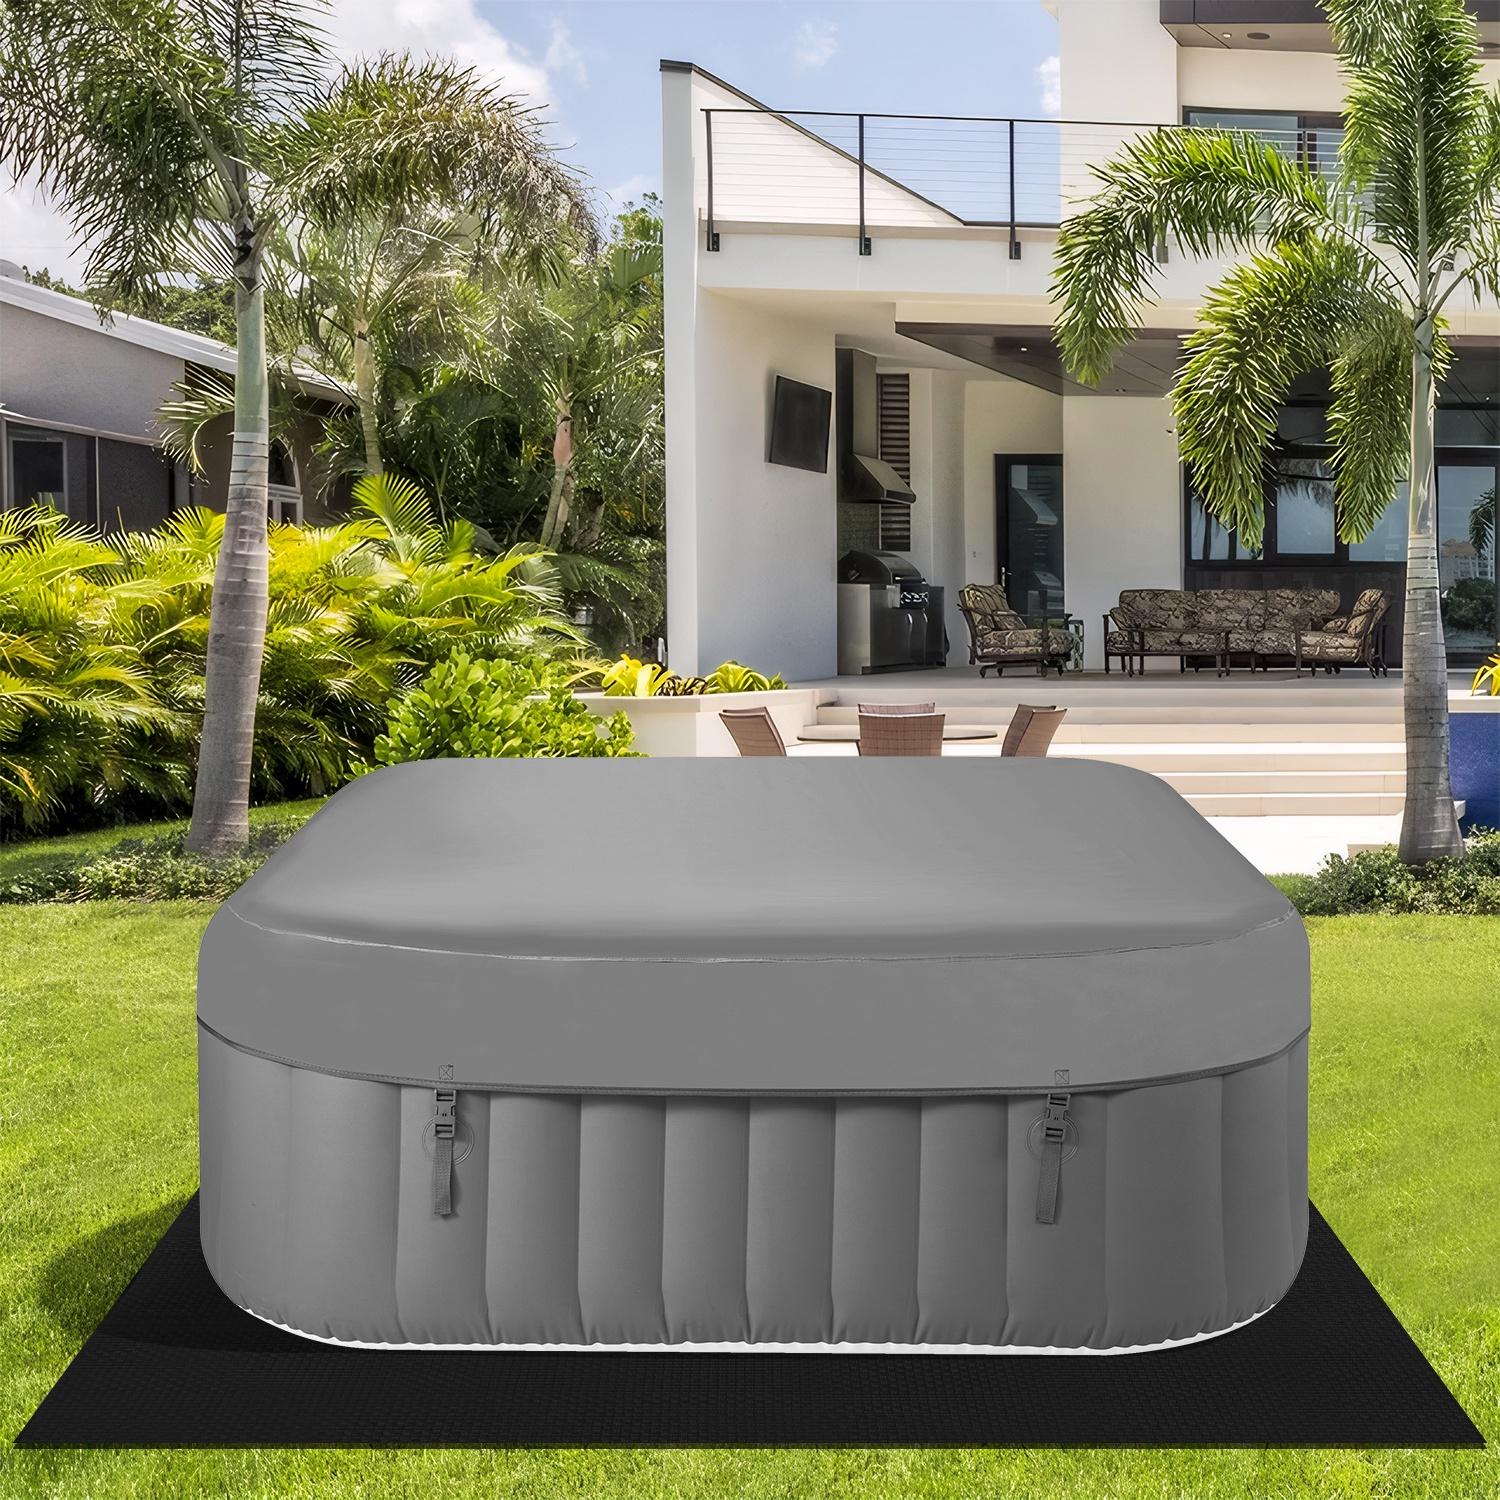 Hot Tub, Seizeen 4-6 Person Inflatable Hot Tub Home SPA for Outdoor, 910L Large Capacity, 130pcs Massage Jets, with 2 Filters, Lockable Cover, Storage Bag, Max 104℉, 73in, Gray - image 2 of 8